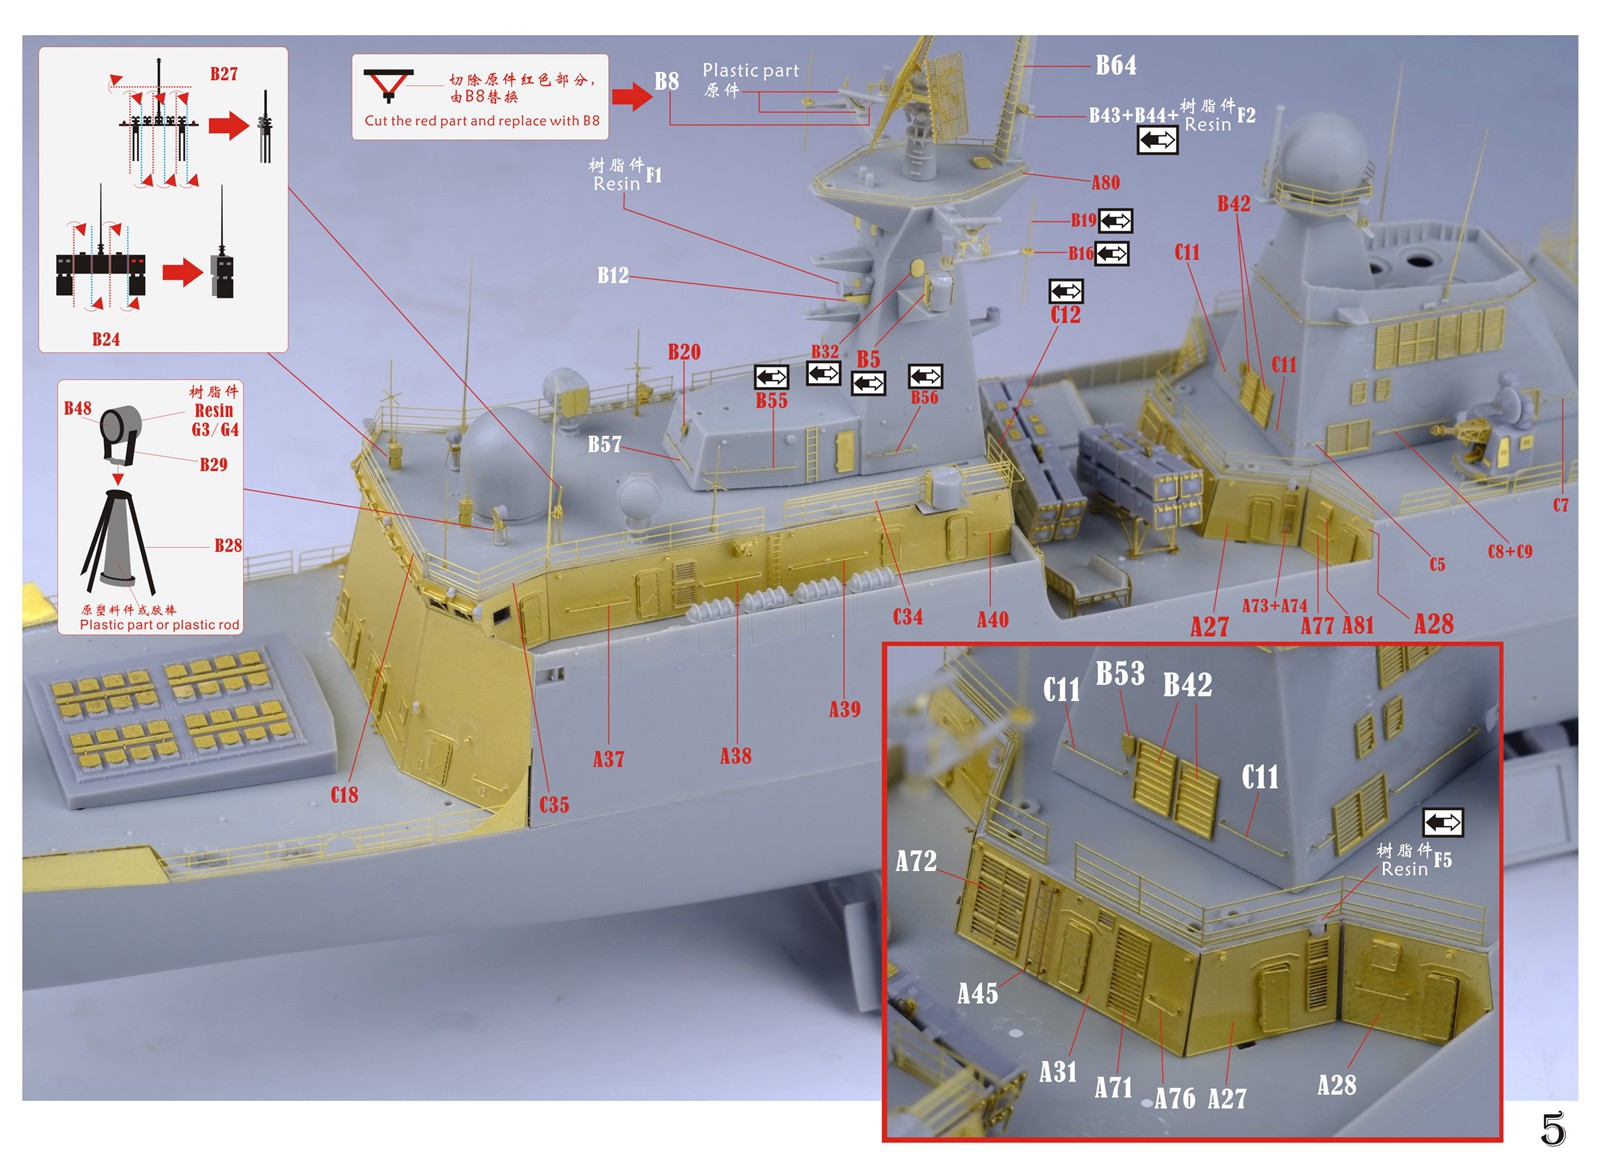 1/350 PLA Navy Type 054A Frigate Super Upgrade Set for Trumpeter - Click Image to Close